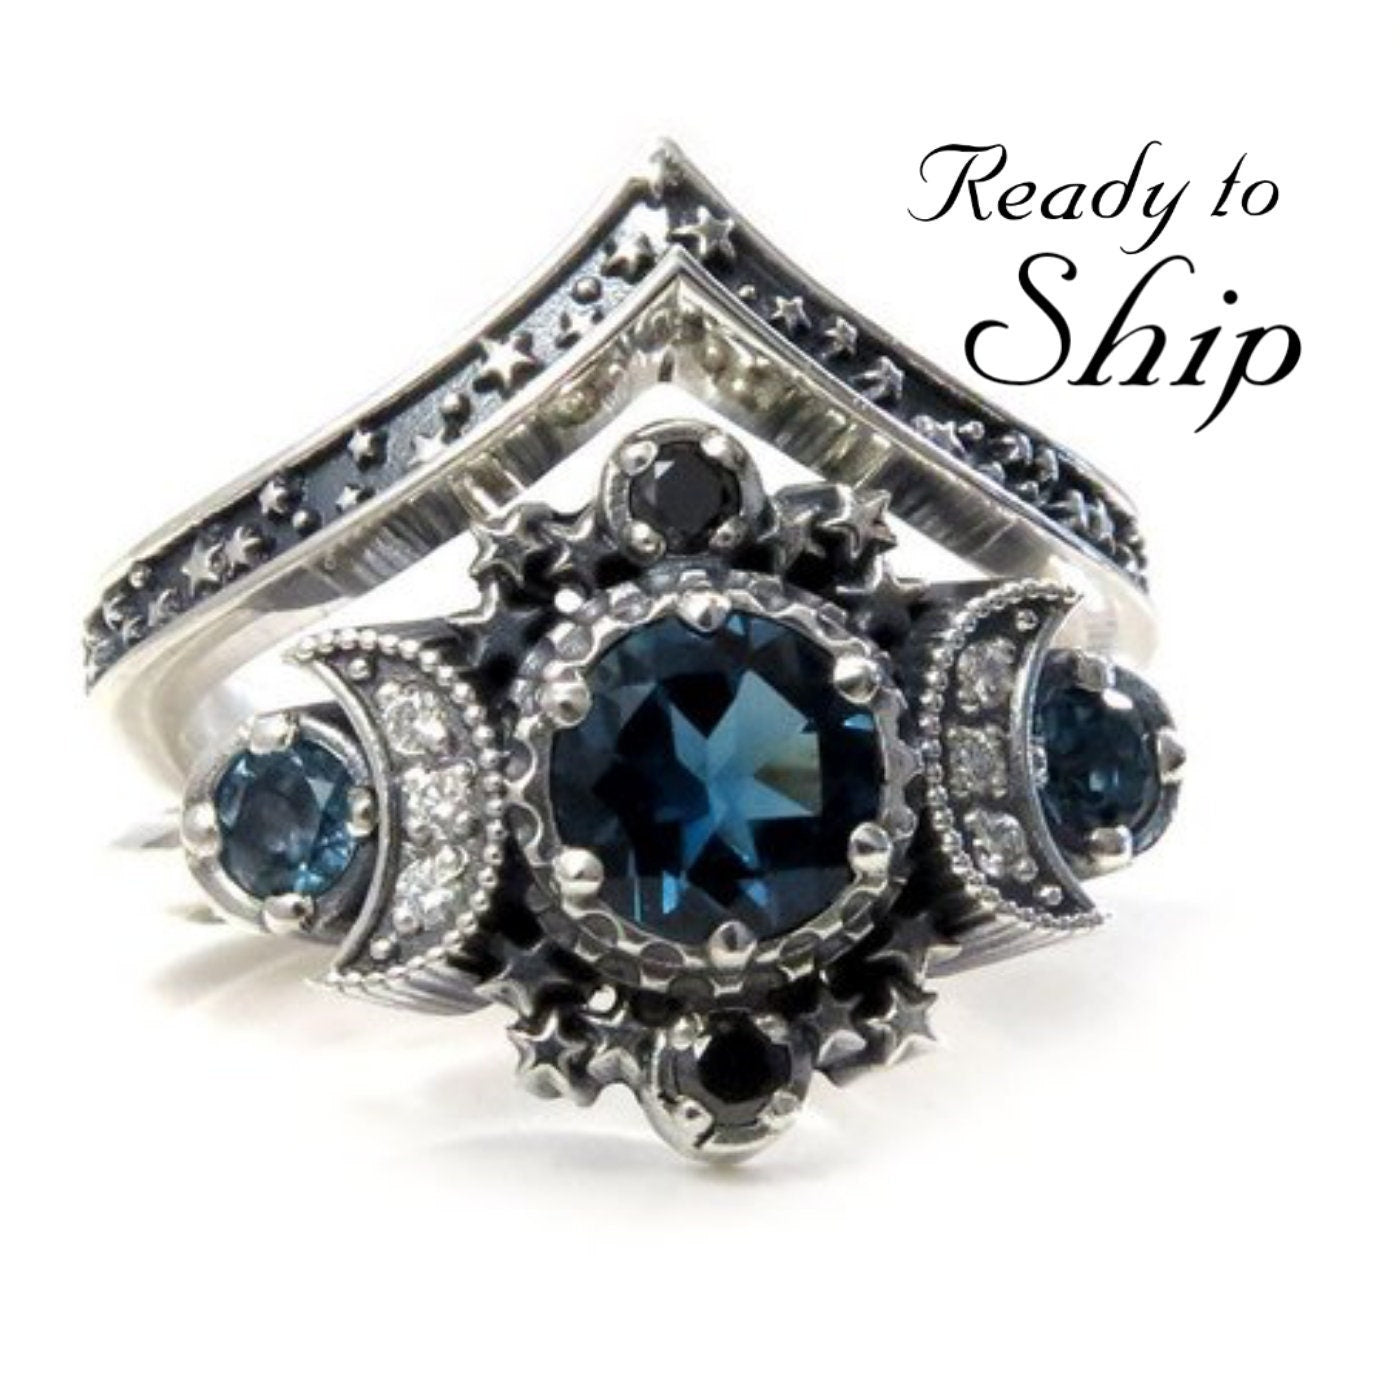 Load image into Gallery viewer, Ready to Ship Size 6 - 8 - London Blue Topaz Cosmos Moon Engagement Ring Set Triple Moon Goddess Silver Ring with Stardust Chevron Band
